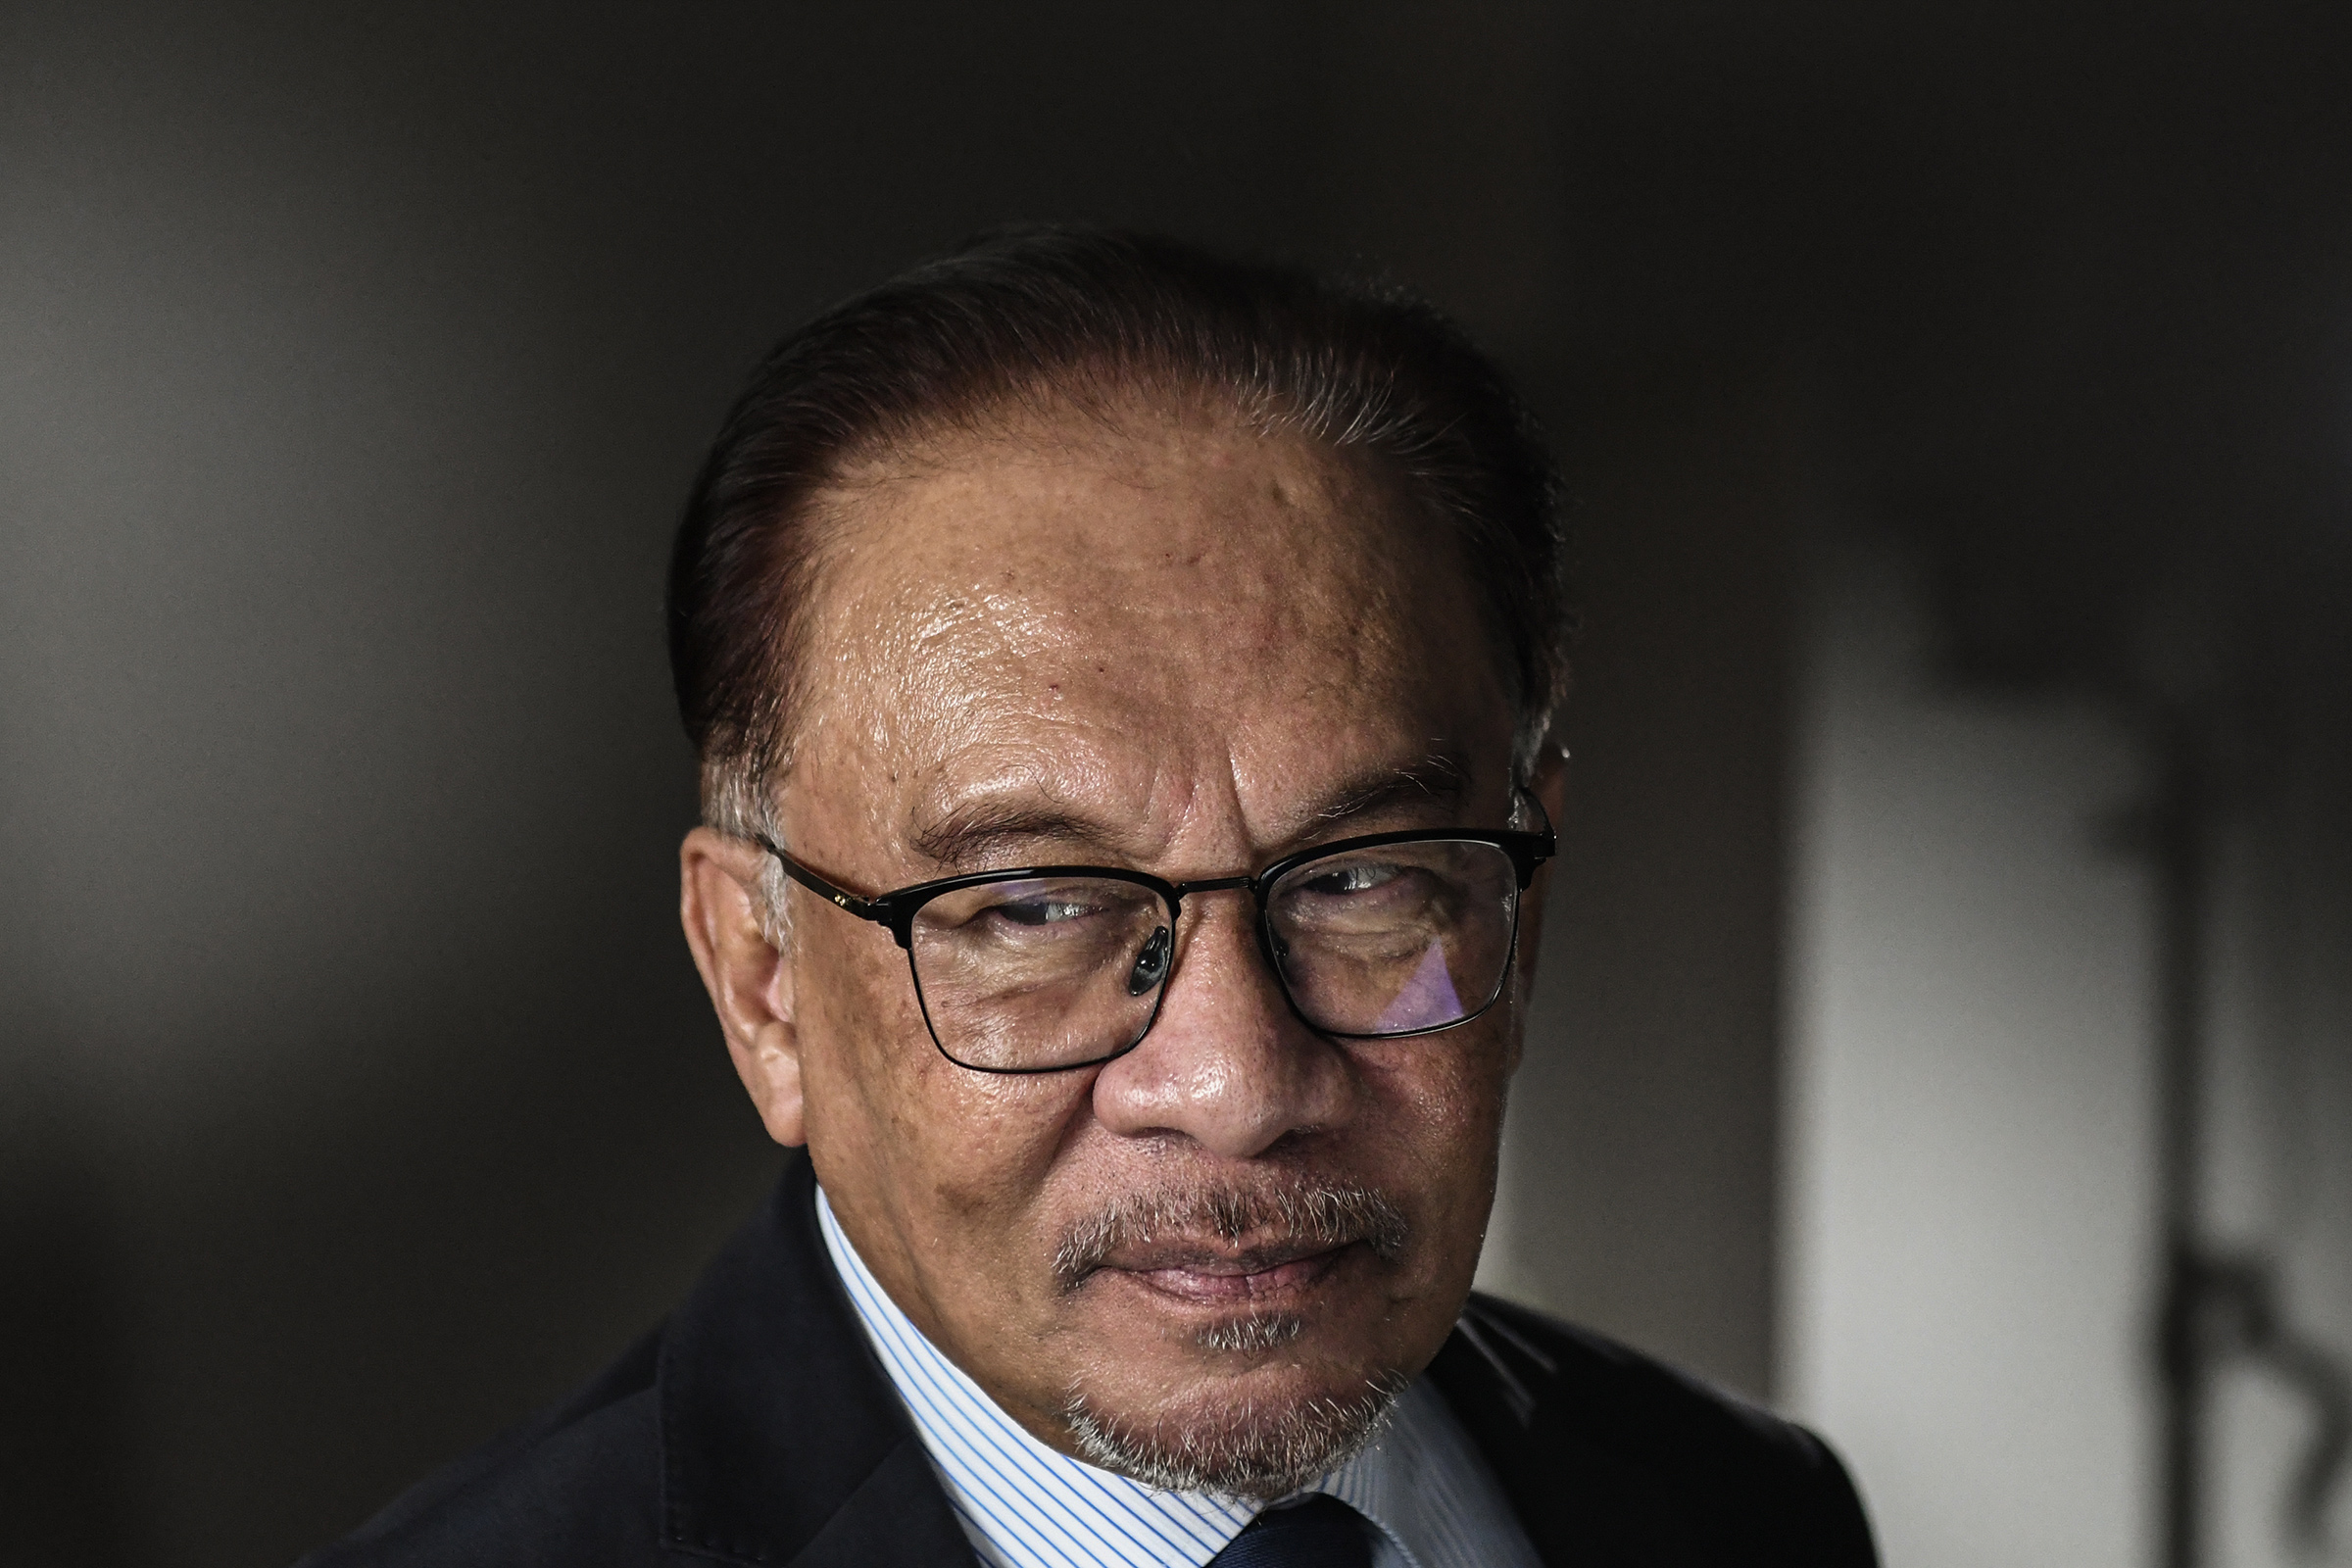 Anwar Ibrahim, Malaysia's prime minister, in New York on Sept. 21.